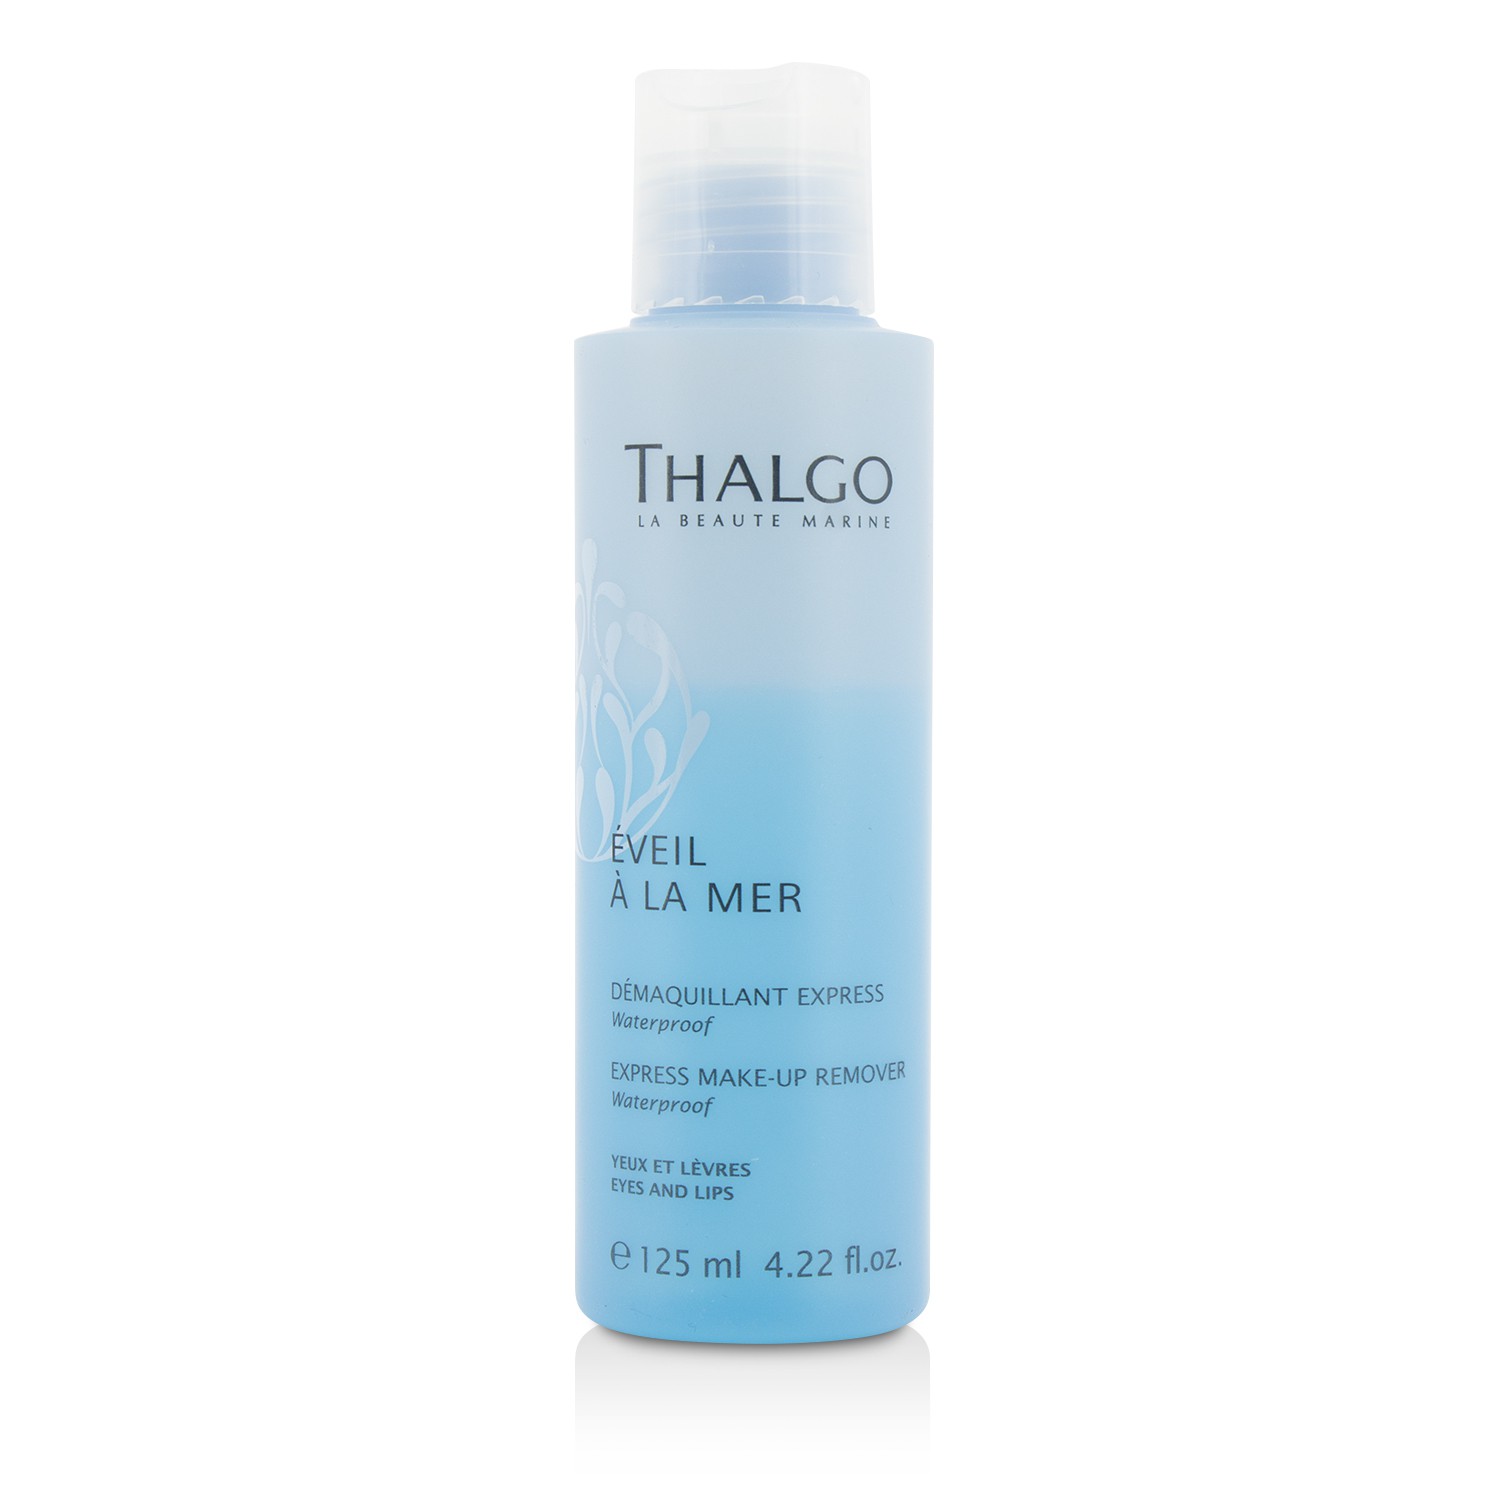 Eveil A La Mer Express Make-Up Remover - For Eyes & Lips Thalgo Image